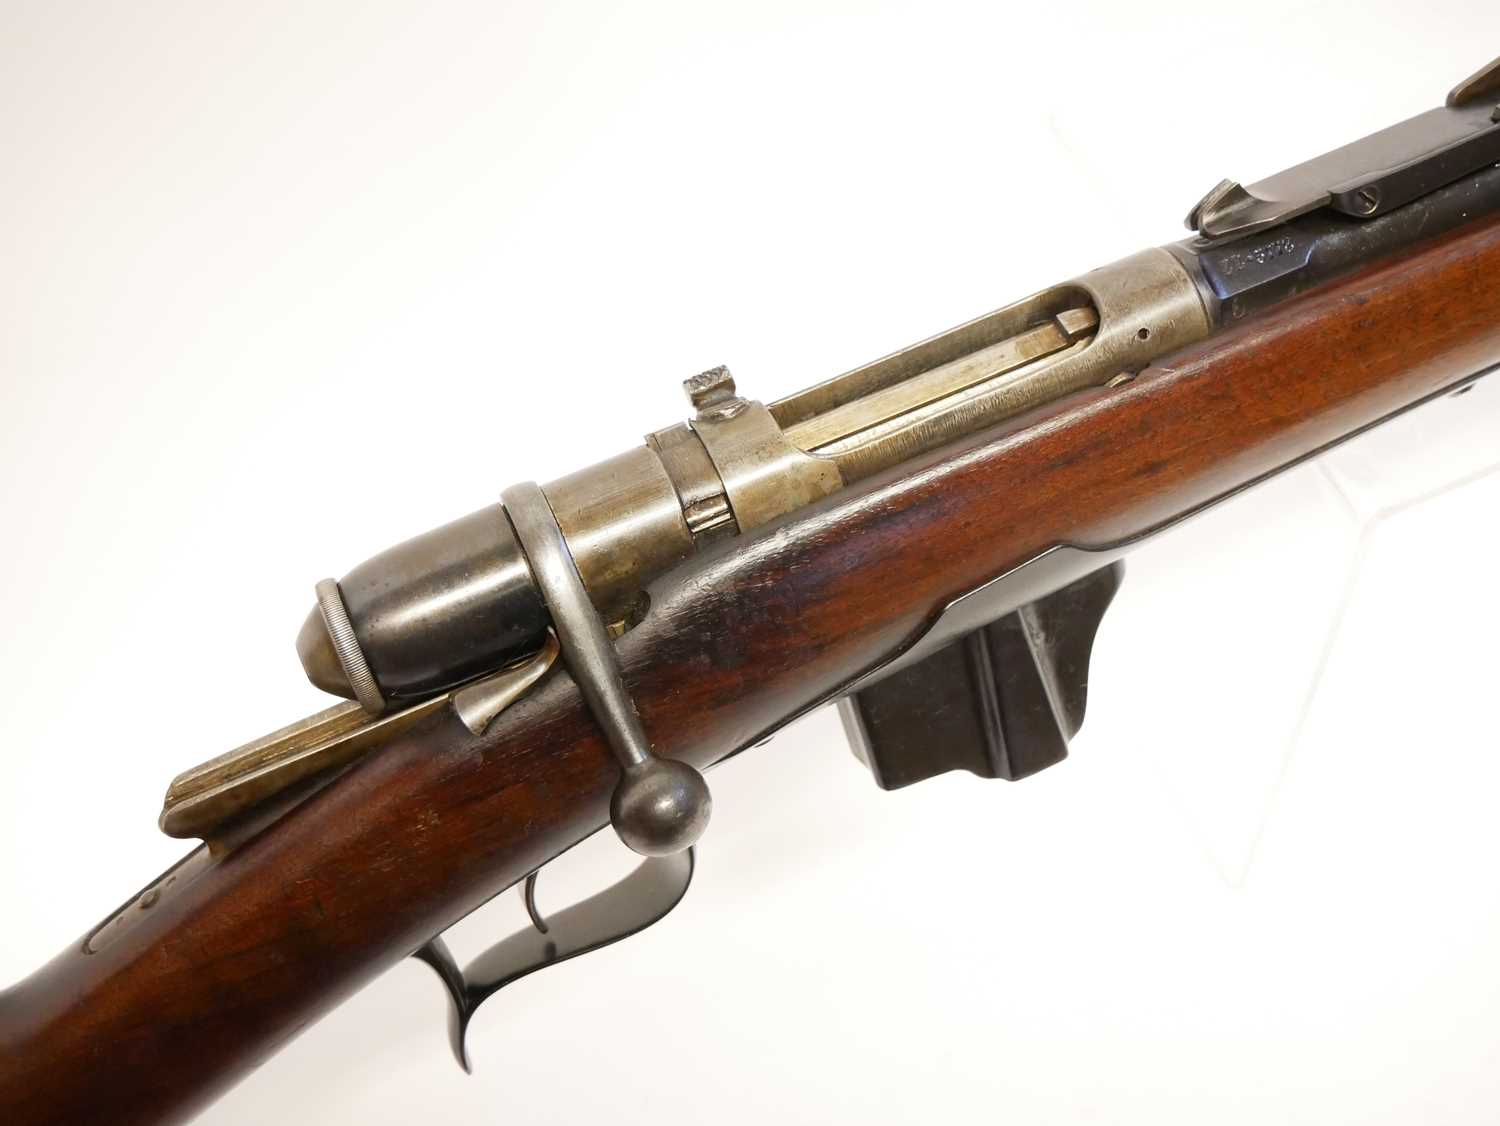 Italian Vetterli M.1870/87 10.35x47R bolt action rifle, serial number 5778, 33.5inch barrel fitted - Image 8 of 17